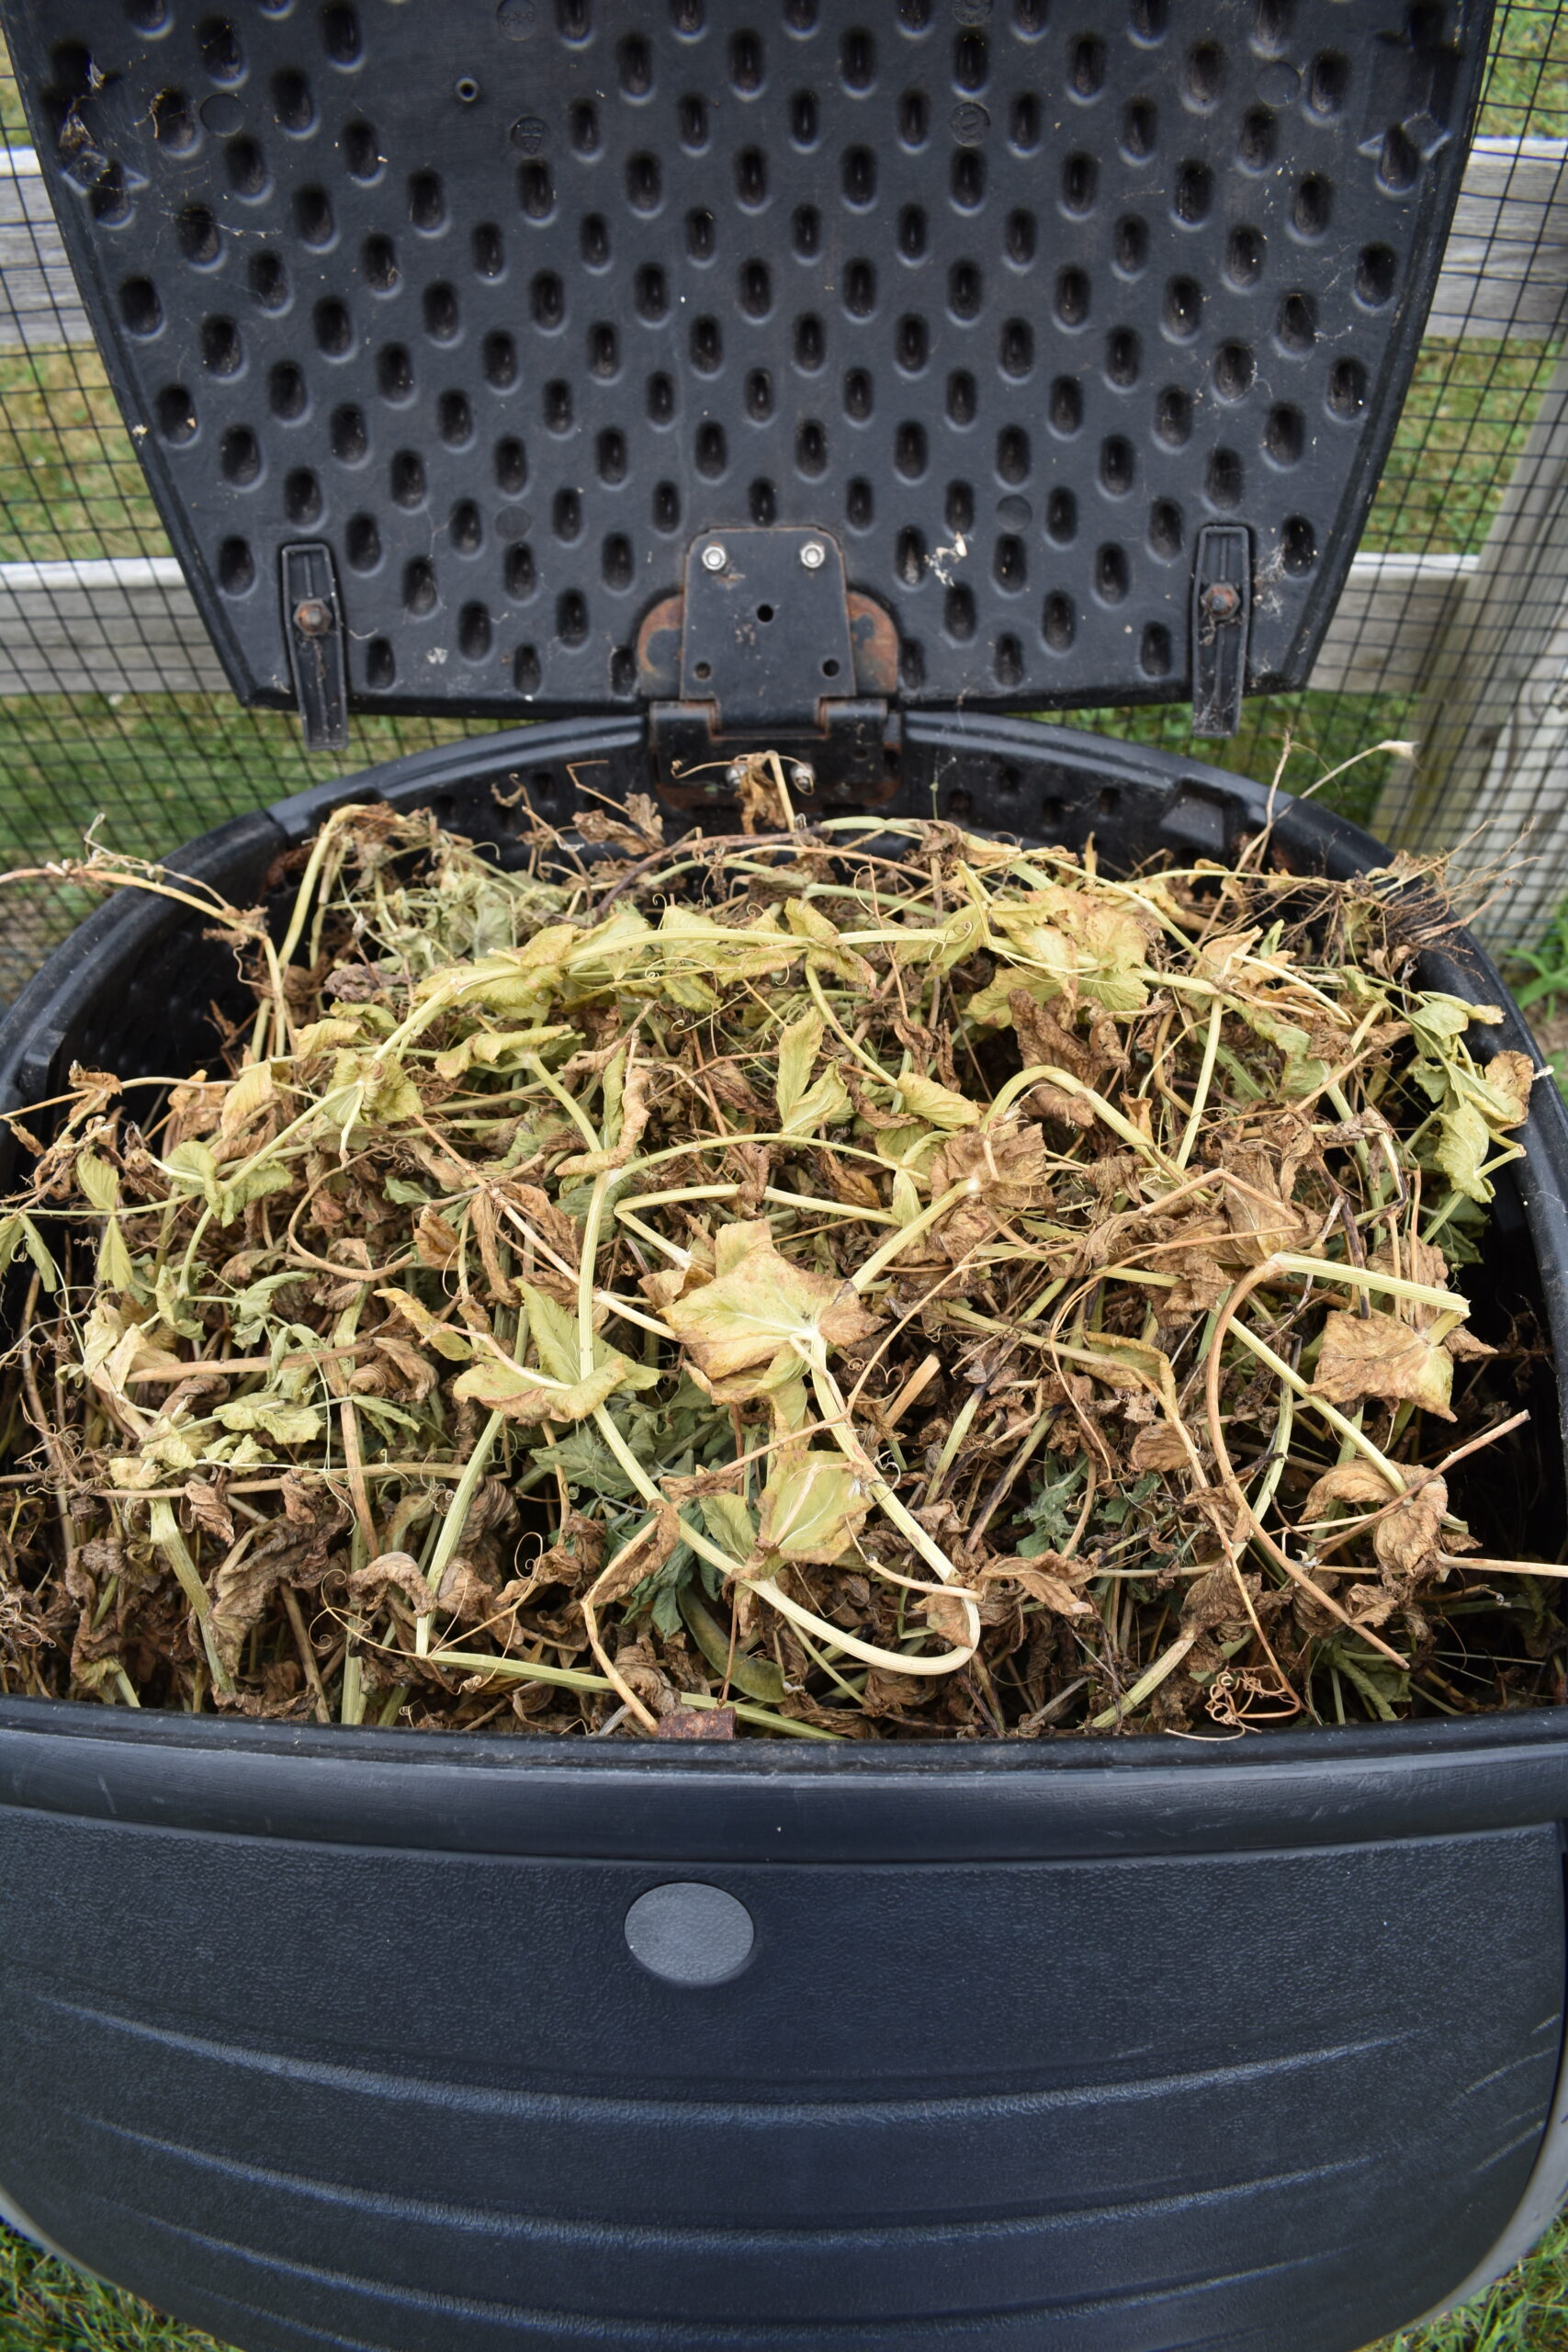 Fall leaves, weeds, spent plants and more yard debris can be added to compost bins rather than sent to a landfill.  BRENDAN J. O'REILLY